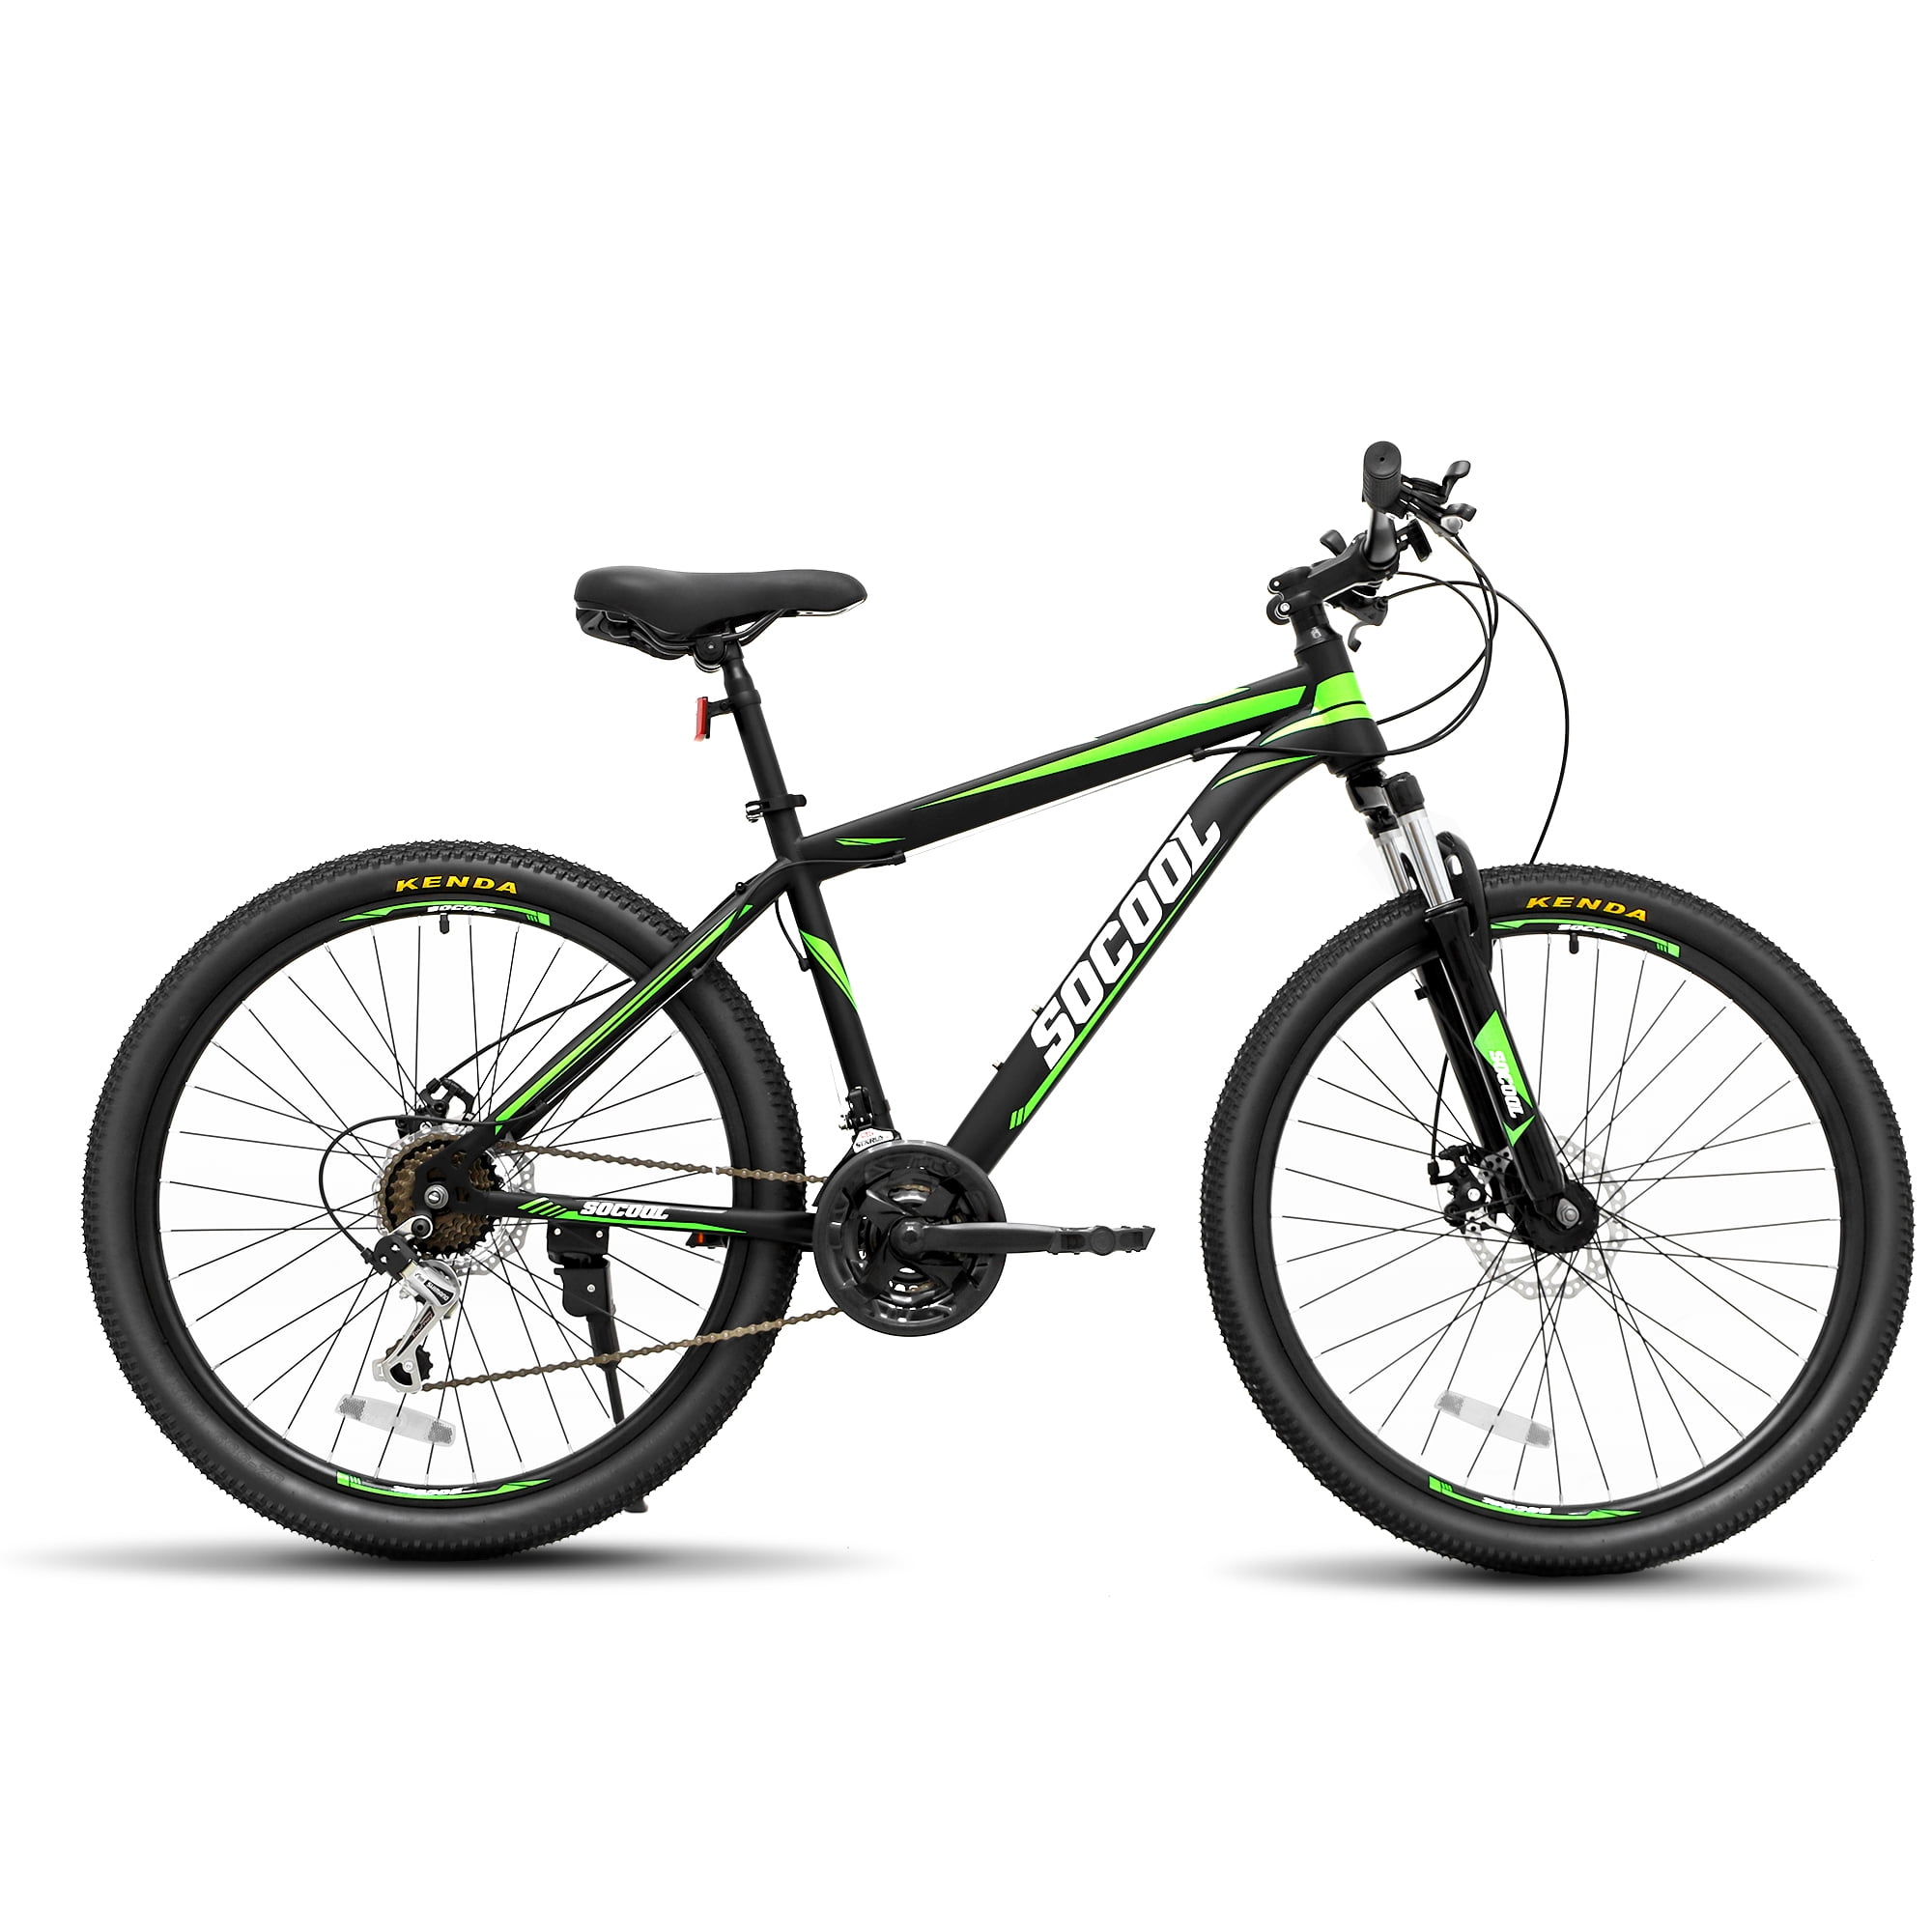 Mountain Bike Outdoor Sports, Exercise Fitness, 21 Speed 26 Inches 